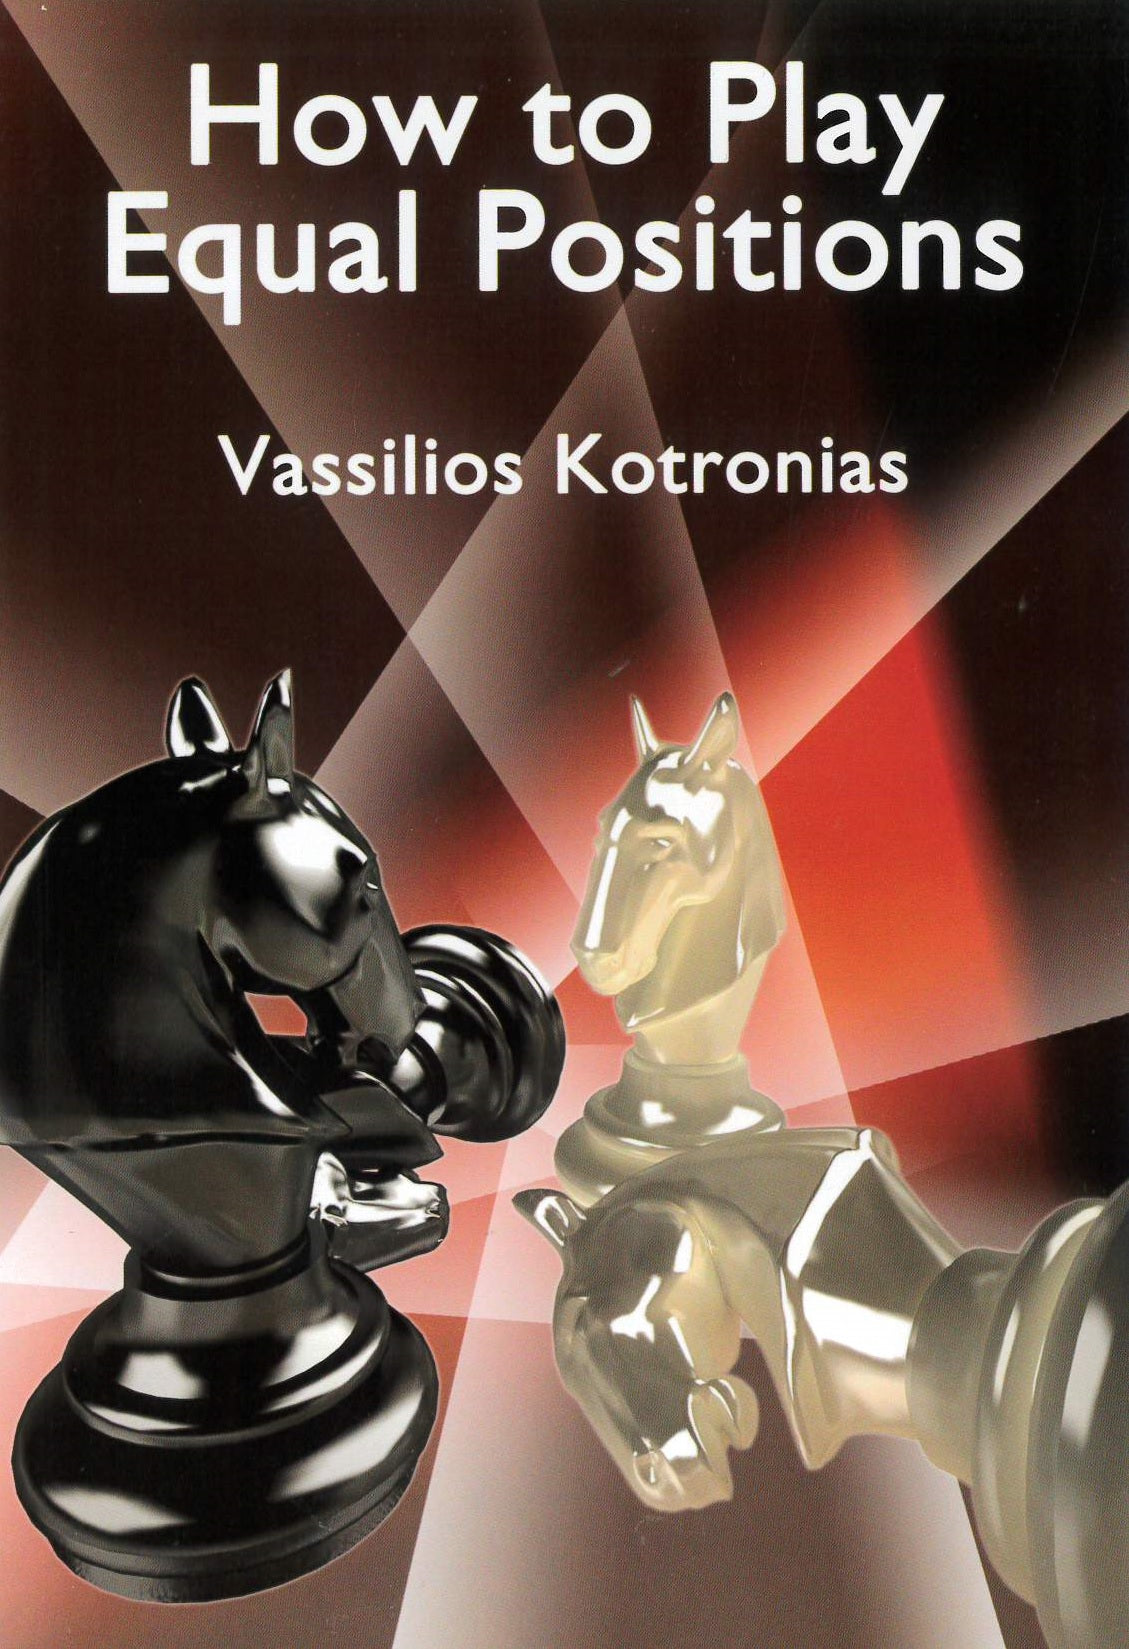 Kotronias: How to Play Equal Positions